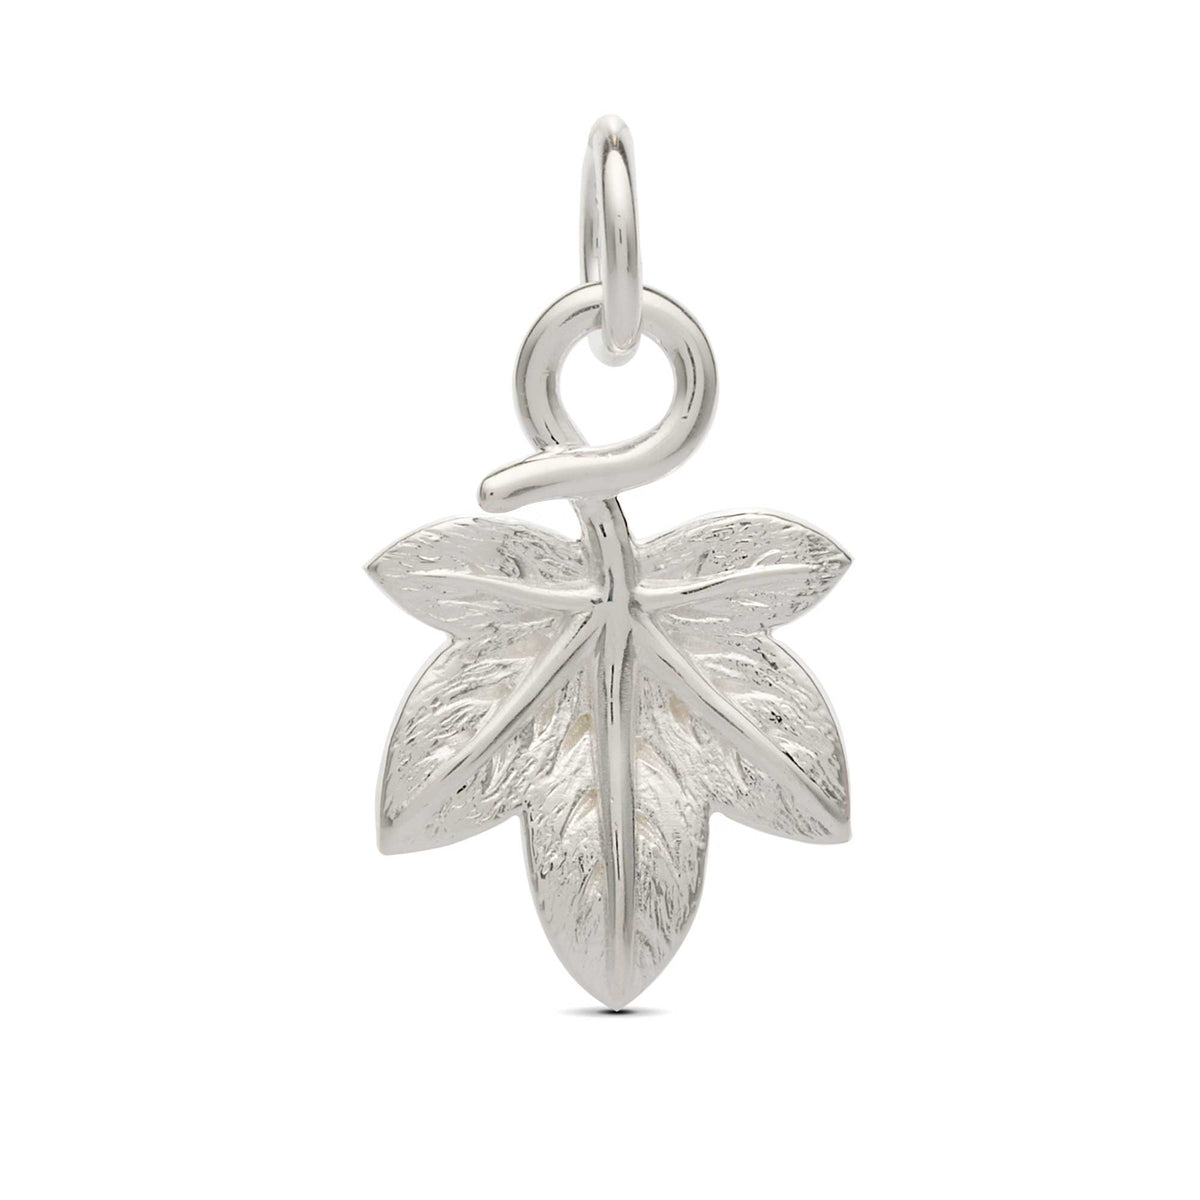 Ivy leaf silver plant nature charm from Scarlett Jewellery symbol of fidelity for marriage